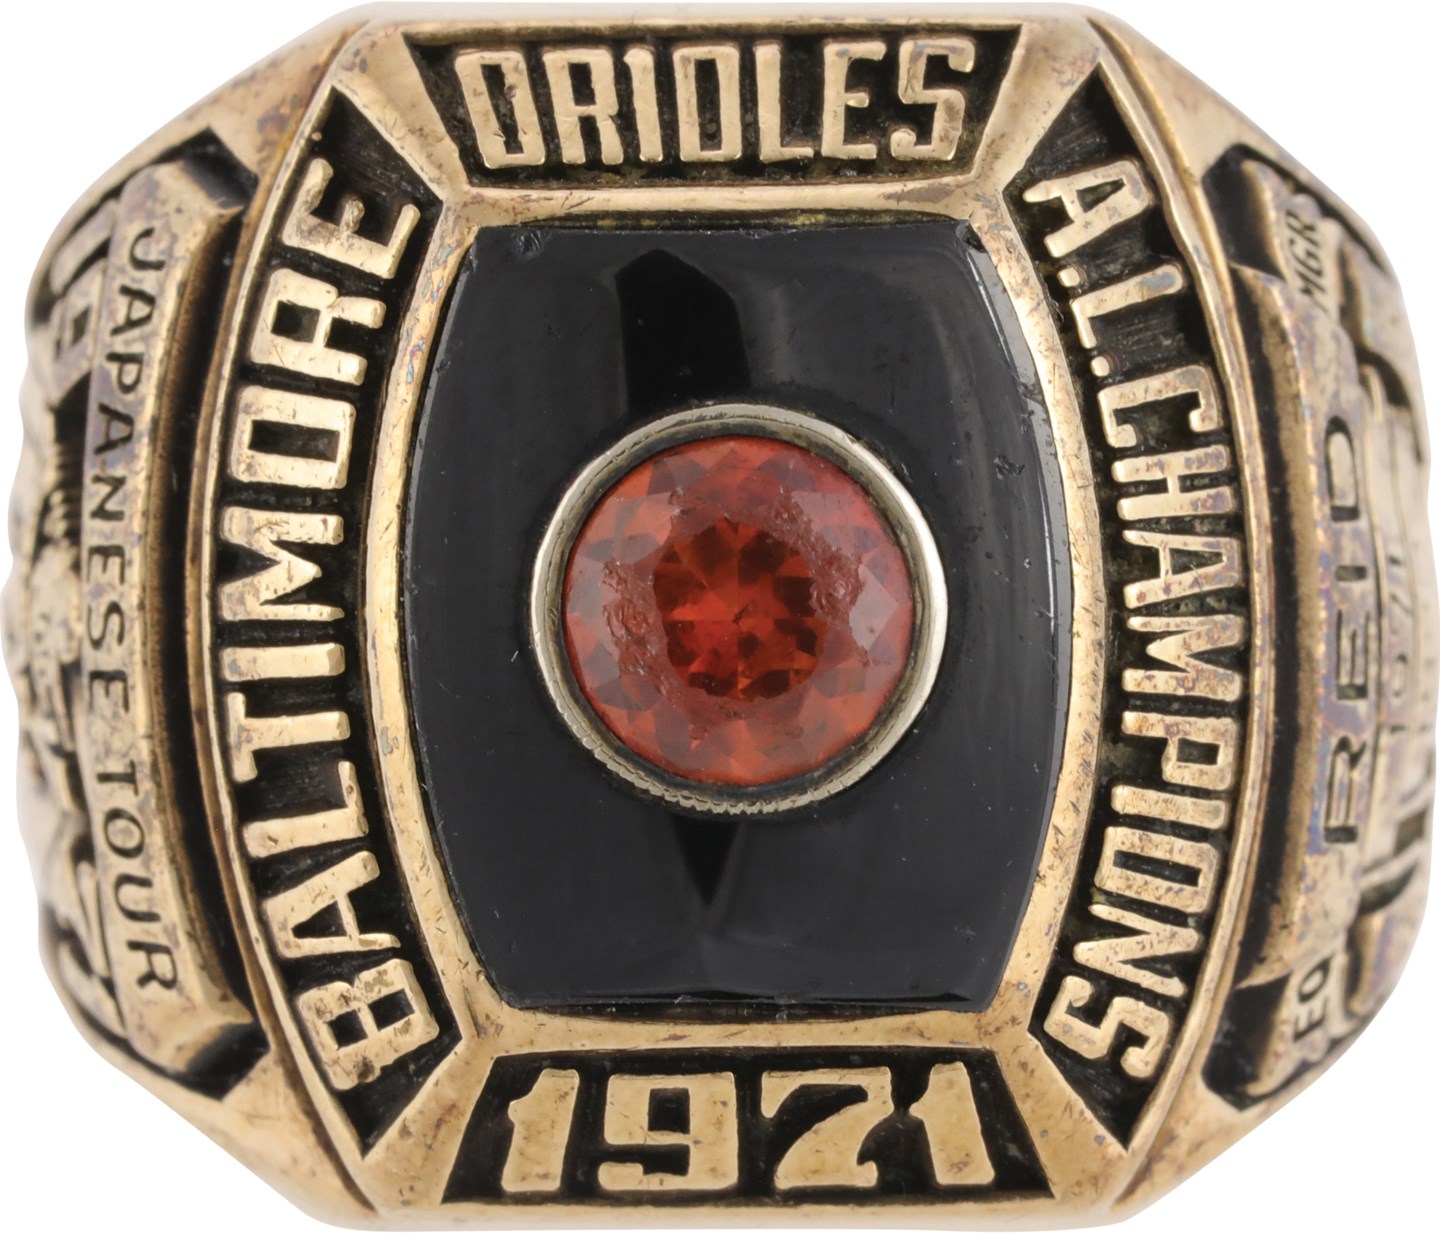 - 1971 Baltimore Orioles American League Championship Ring